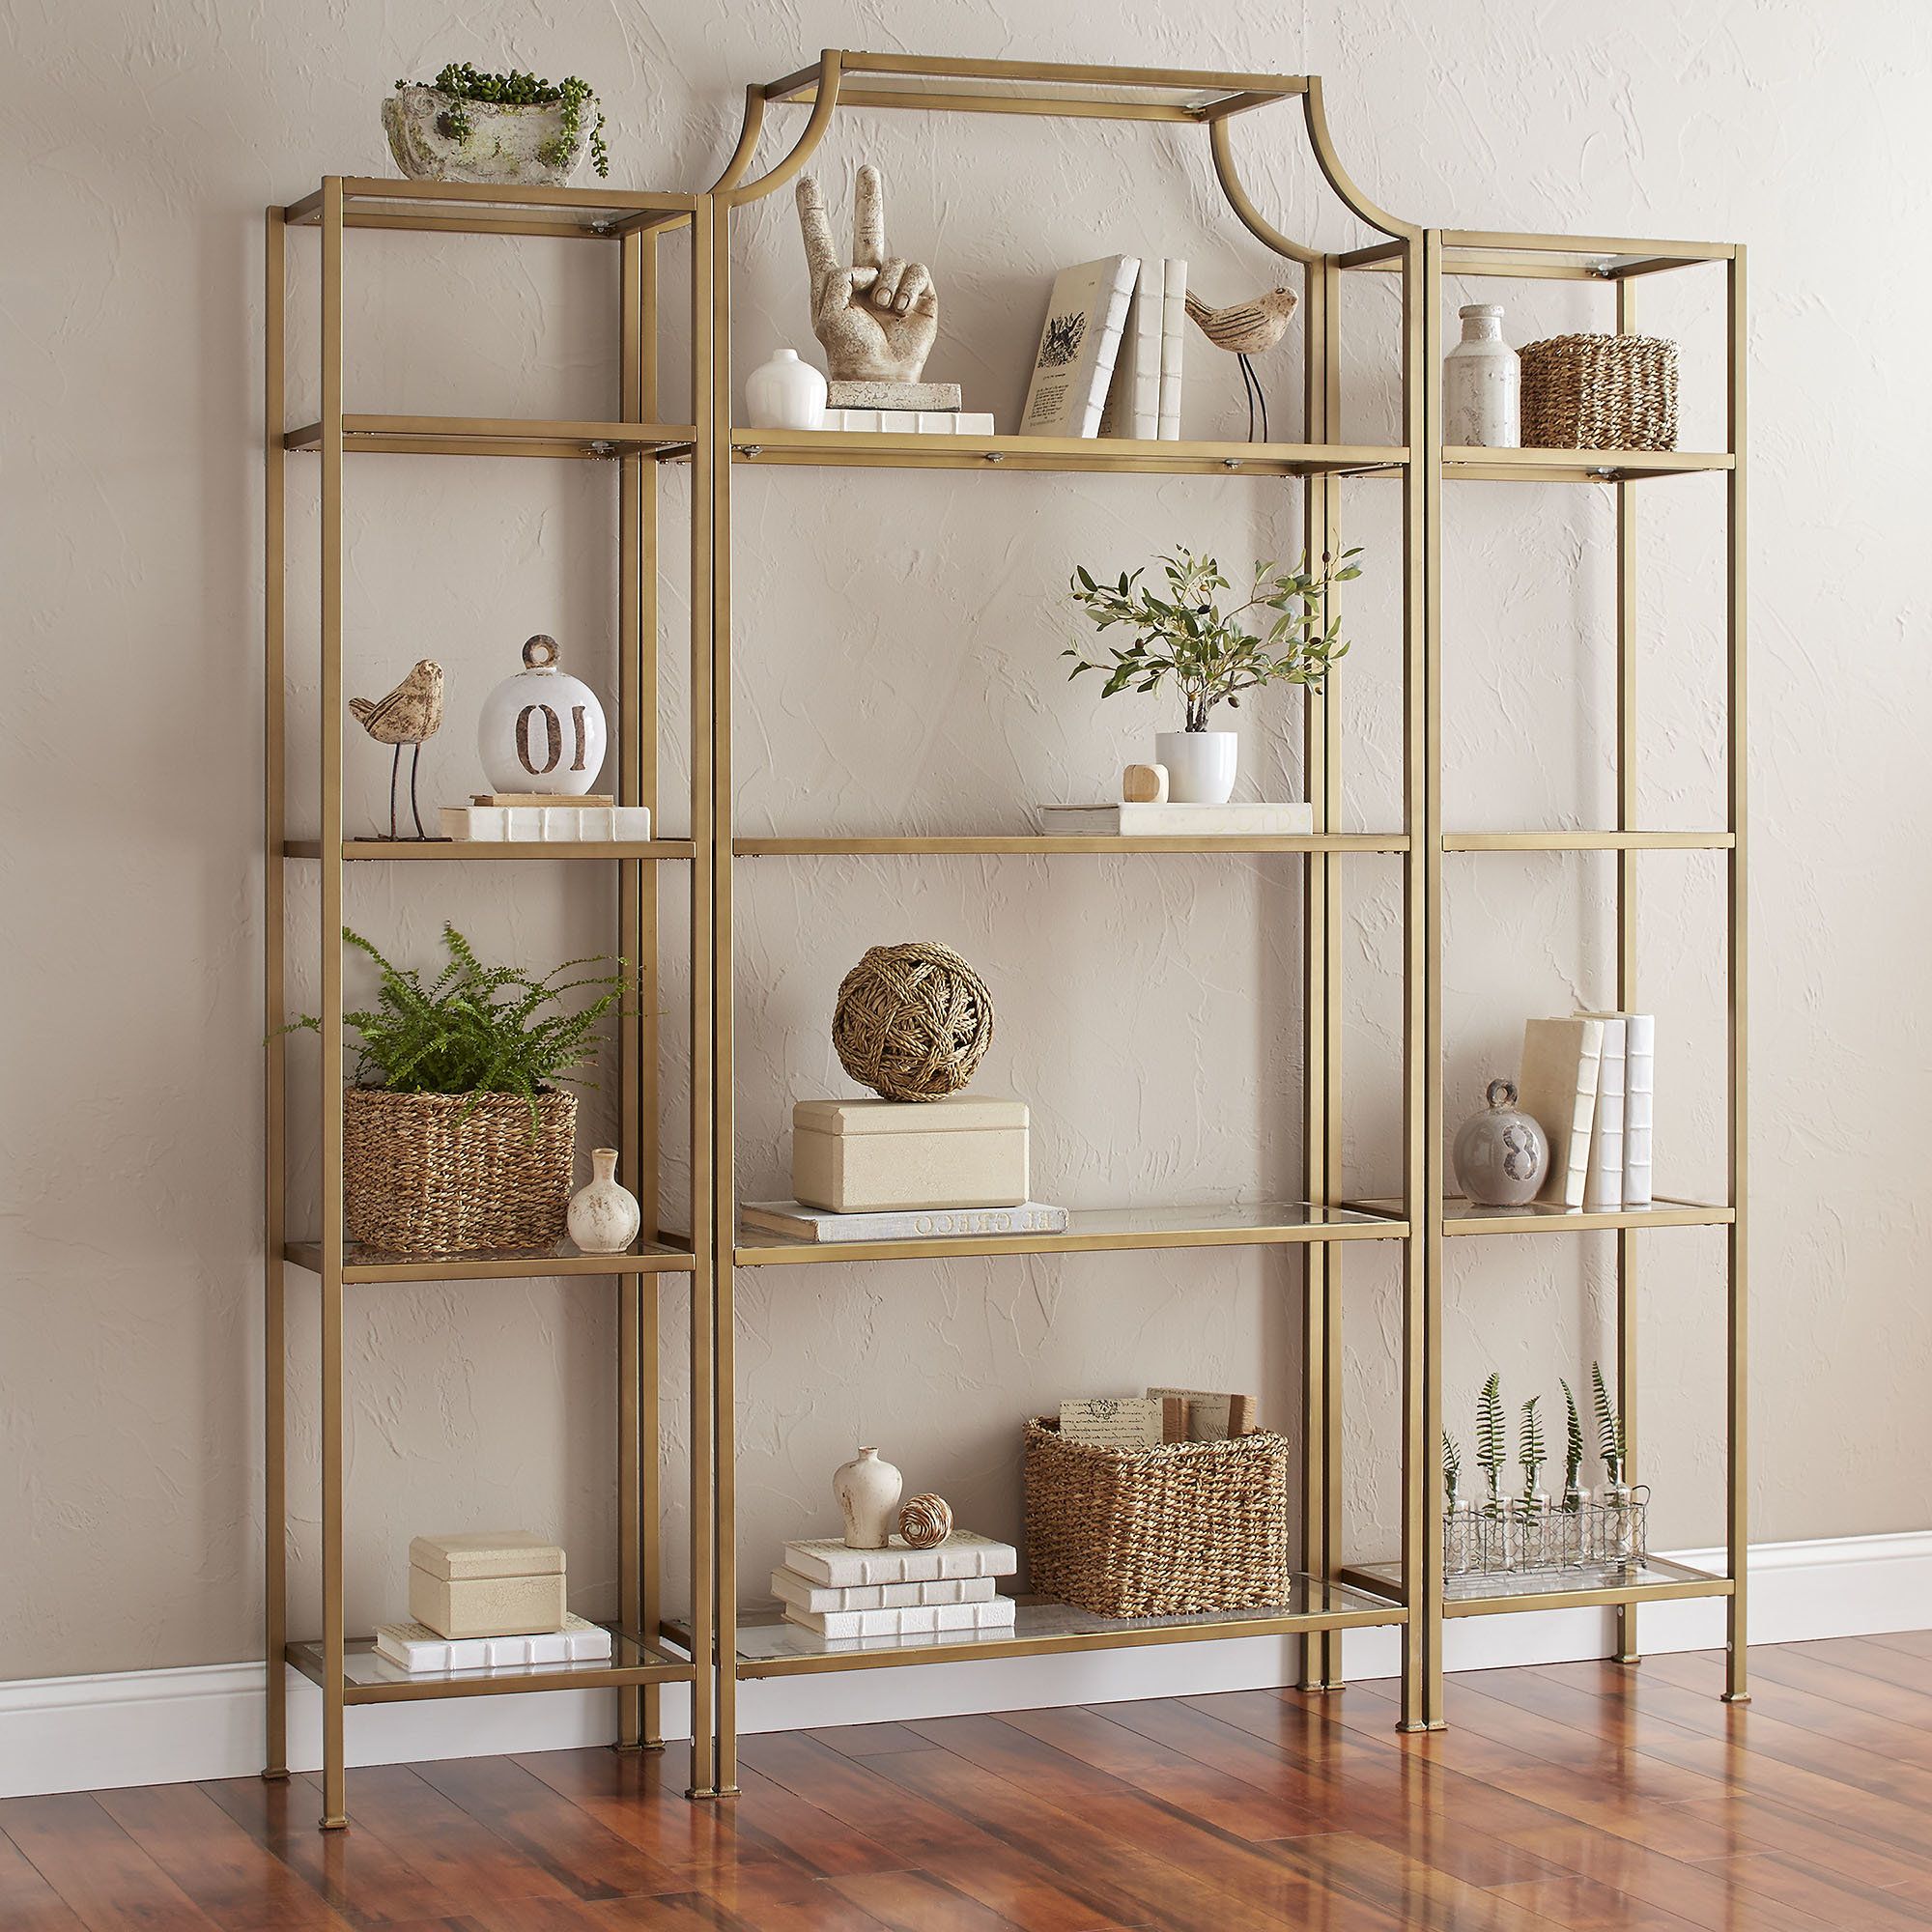 Most Popular Caldwell Etagere Bookcases Regarding Buchanan Etagere Bookcase (View 6 of 20)